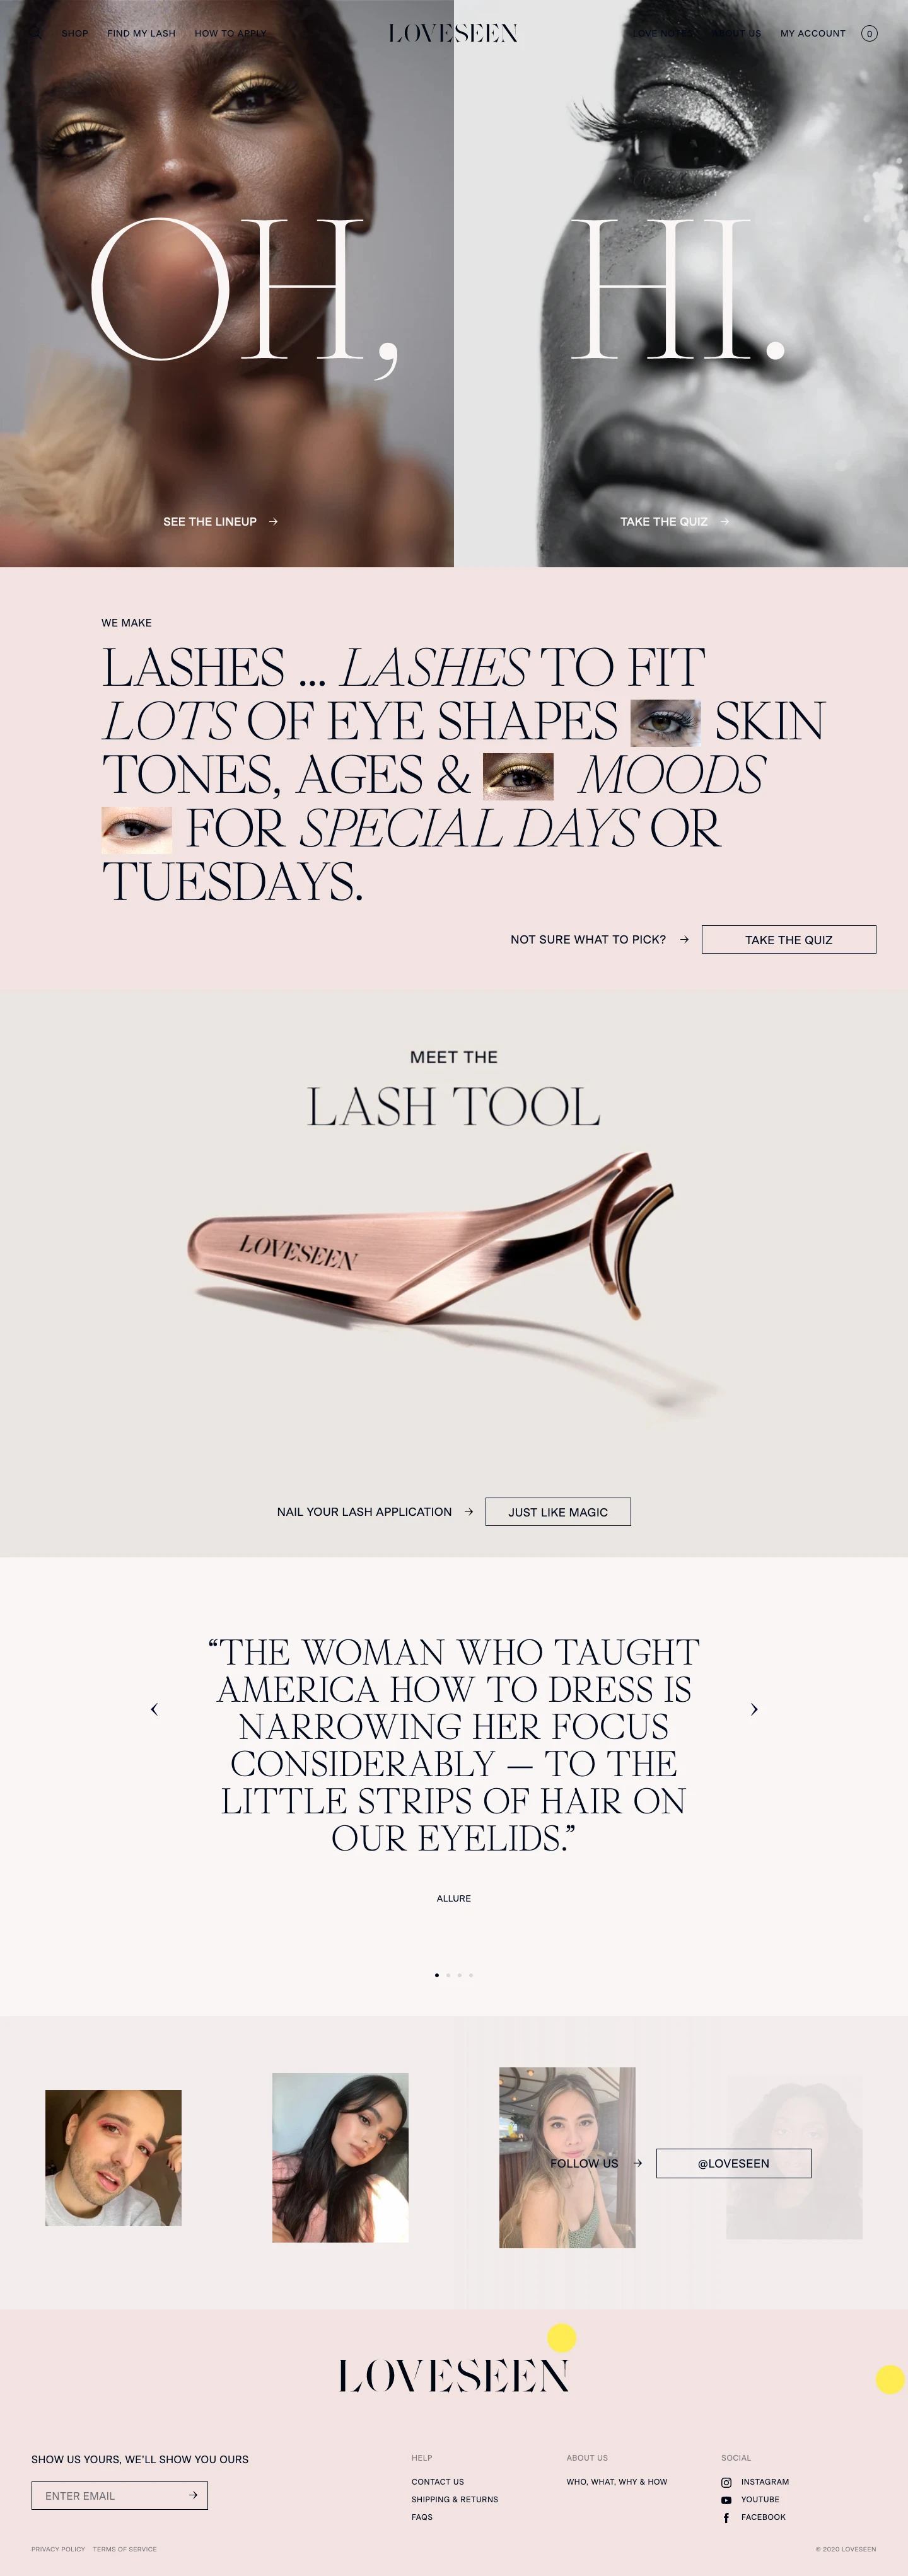 LoveSeen Landing Page Example: A new kind of fake lash.